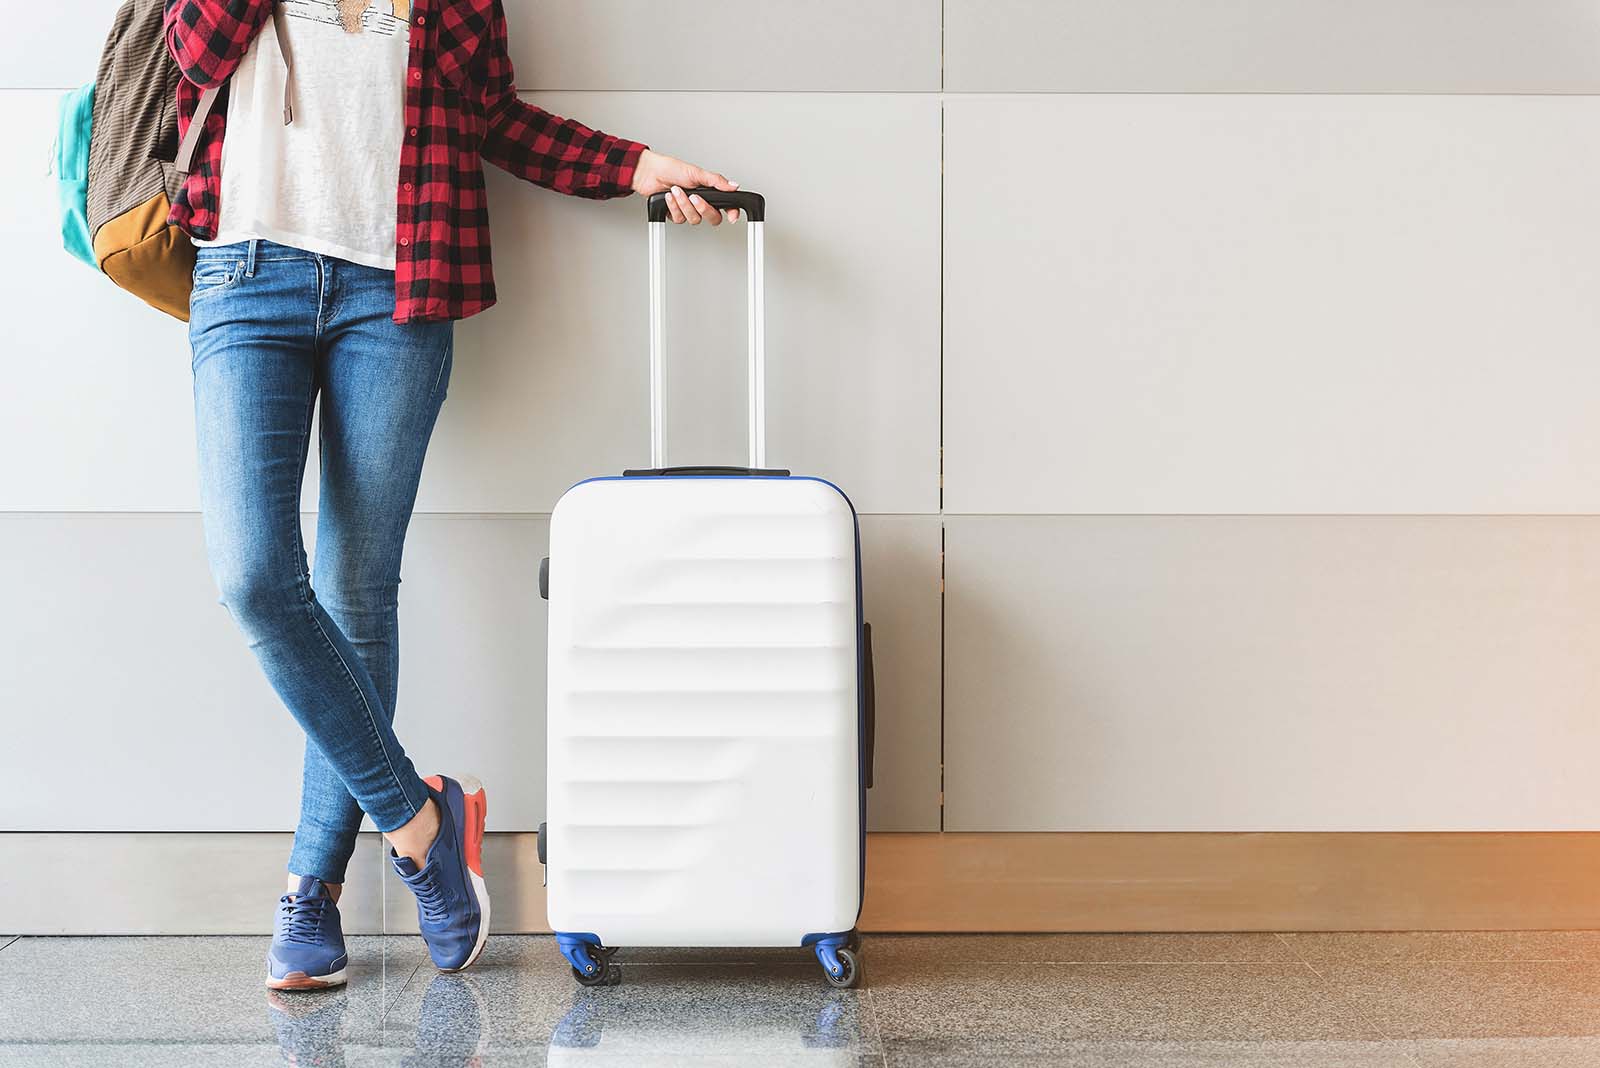 Ensure you know your baggage restrictions before flying